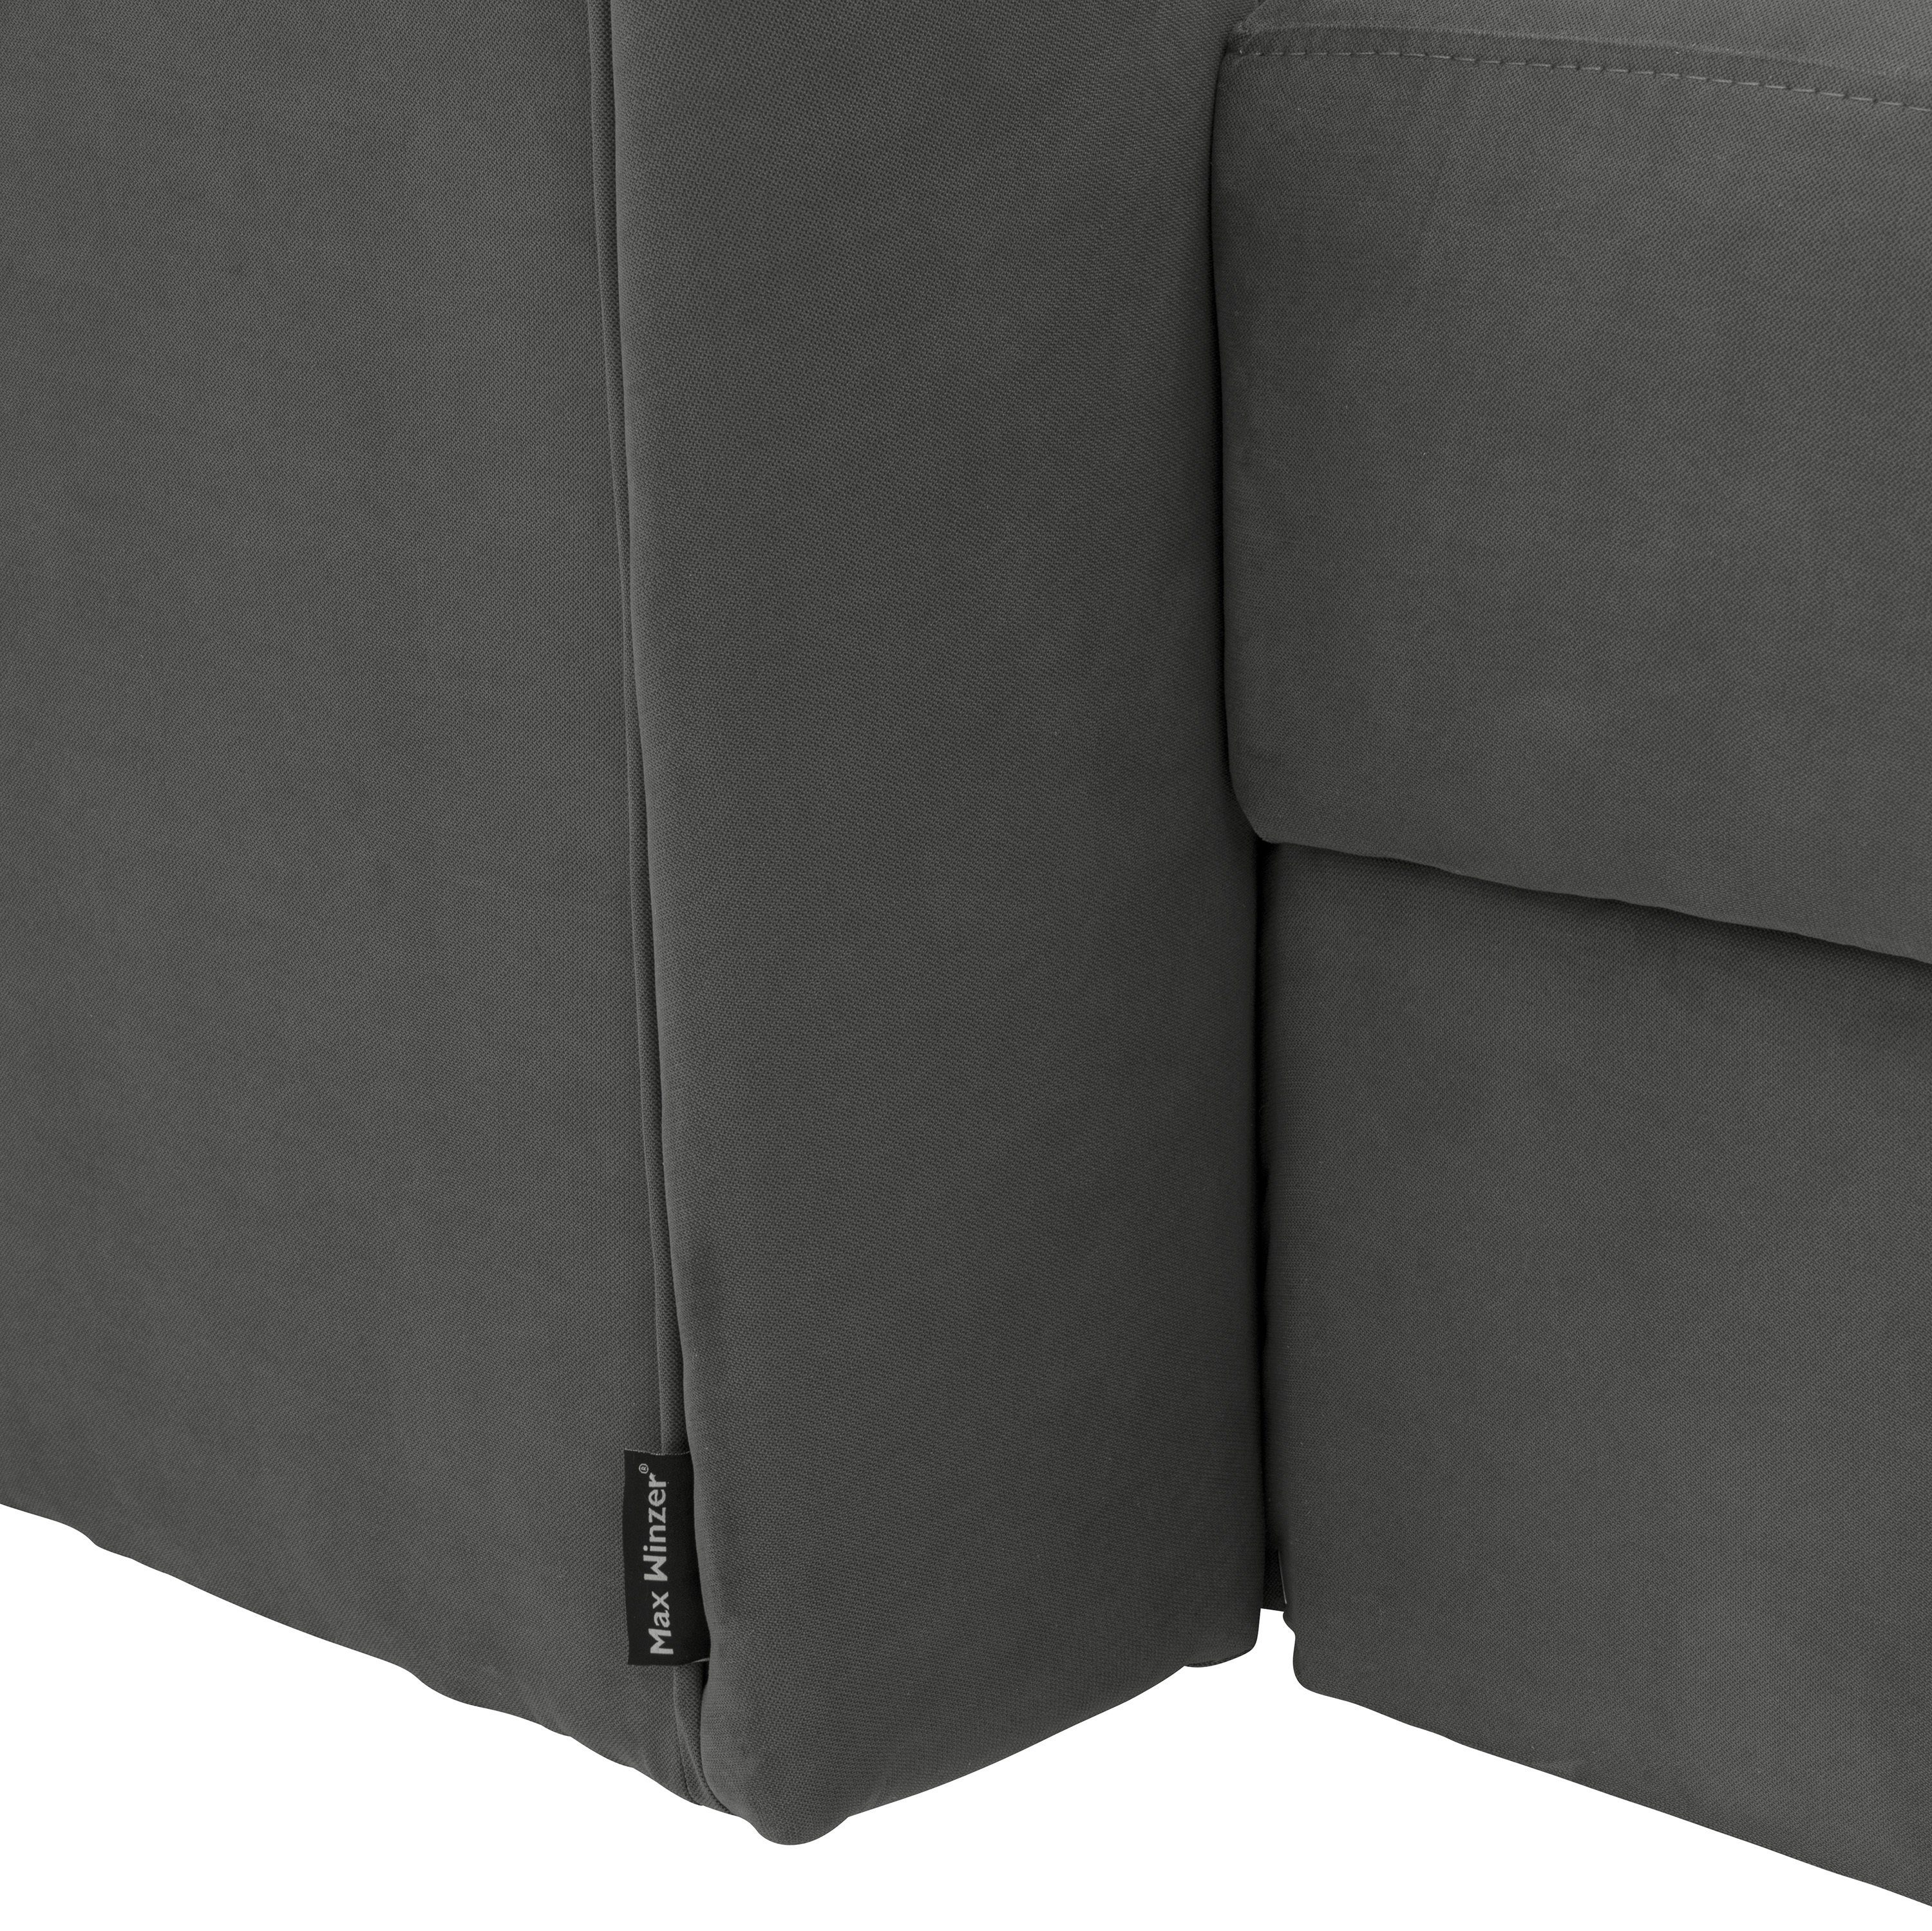 rechts Winzer® Max Sofa Recamiere Armlehne Evelyn,